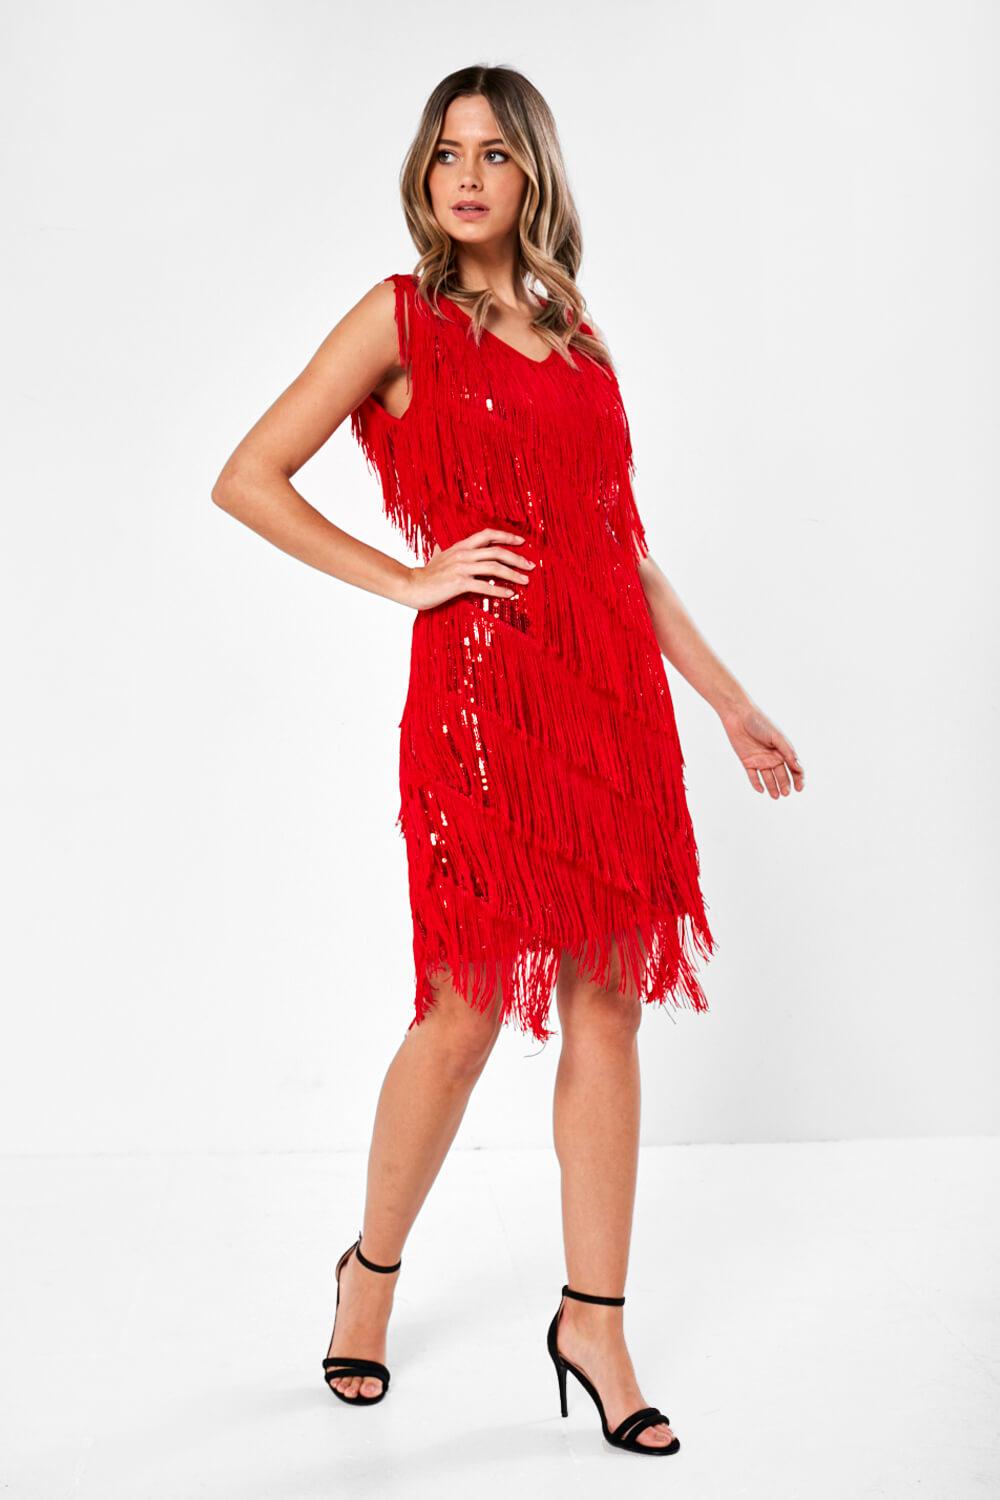 Stella Tanit Fringe and Sequin Dress in Red | iCLOTHING - iCLOTHING